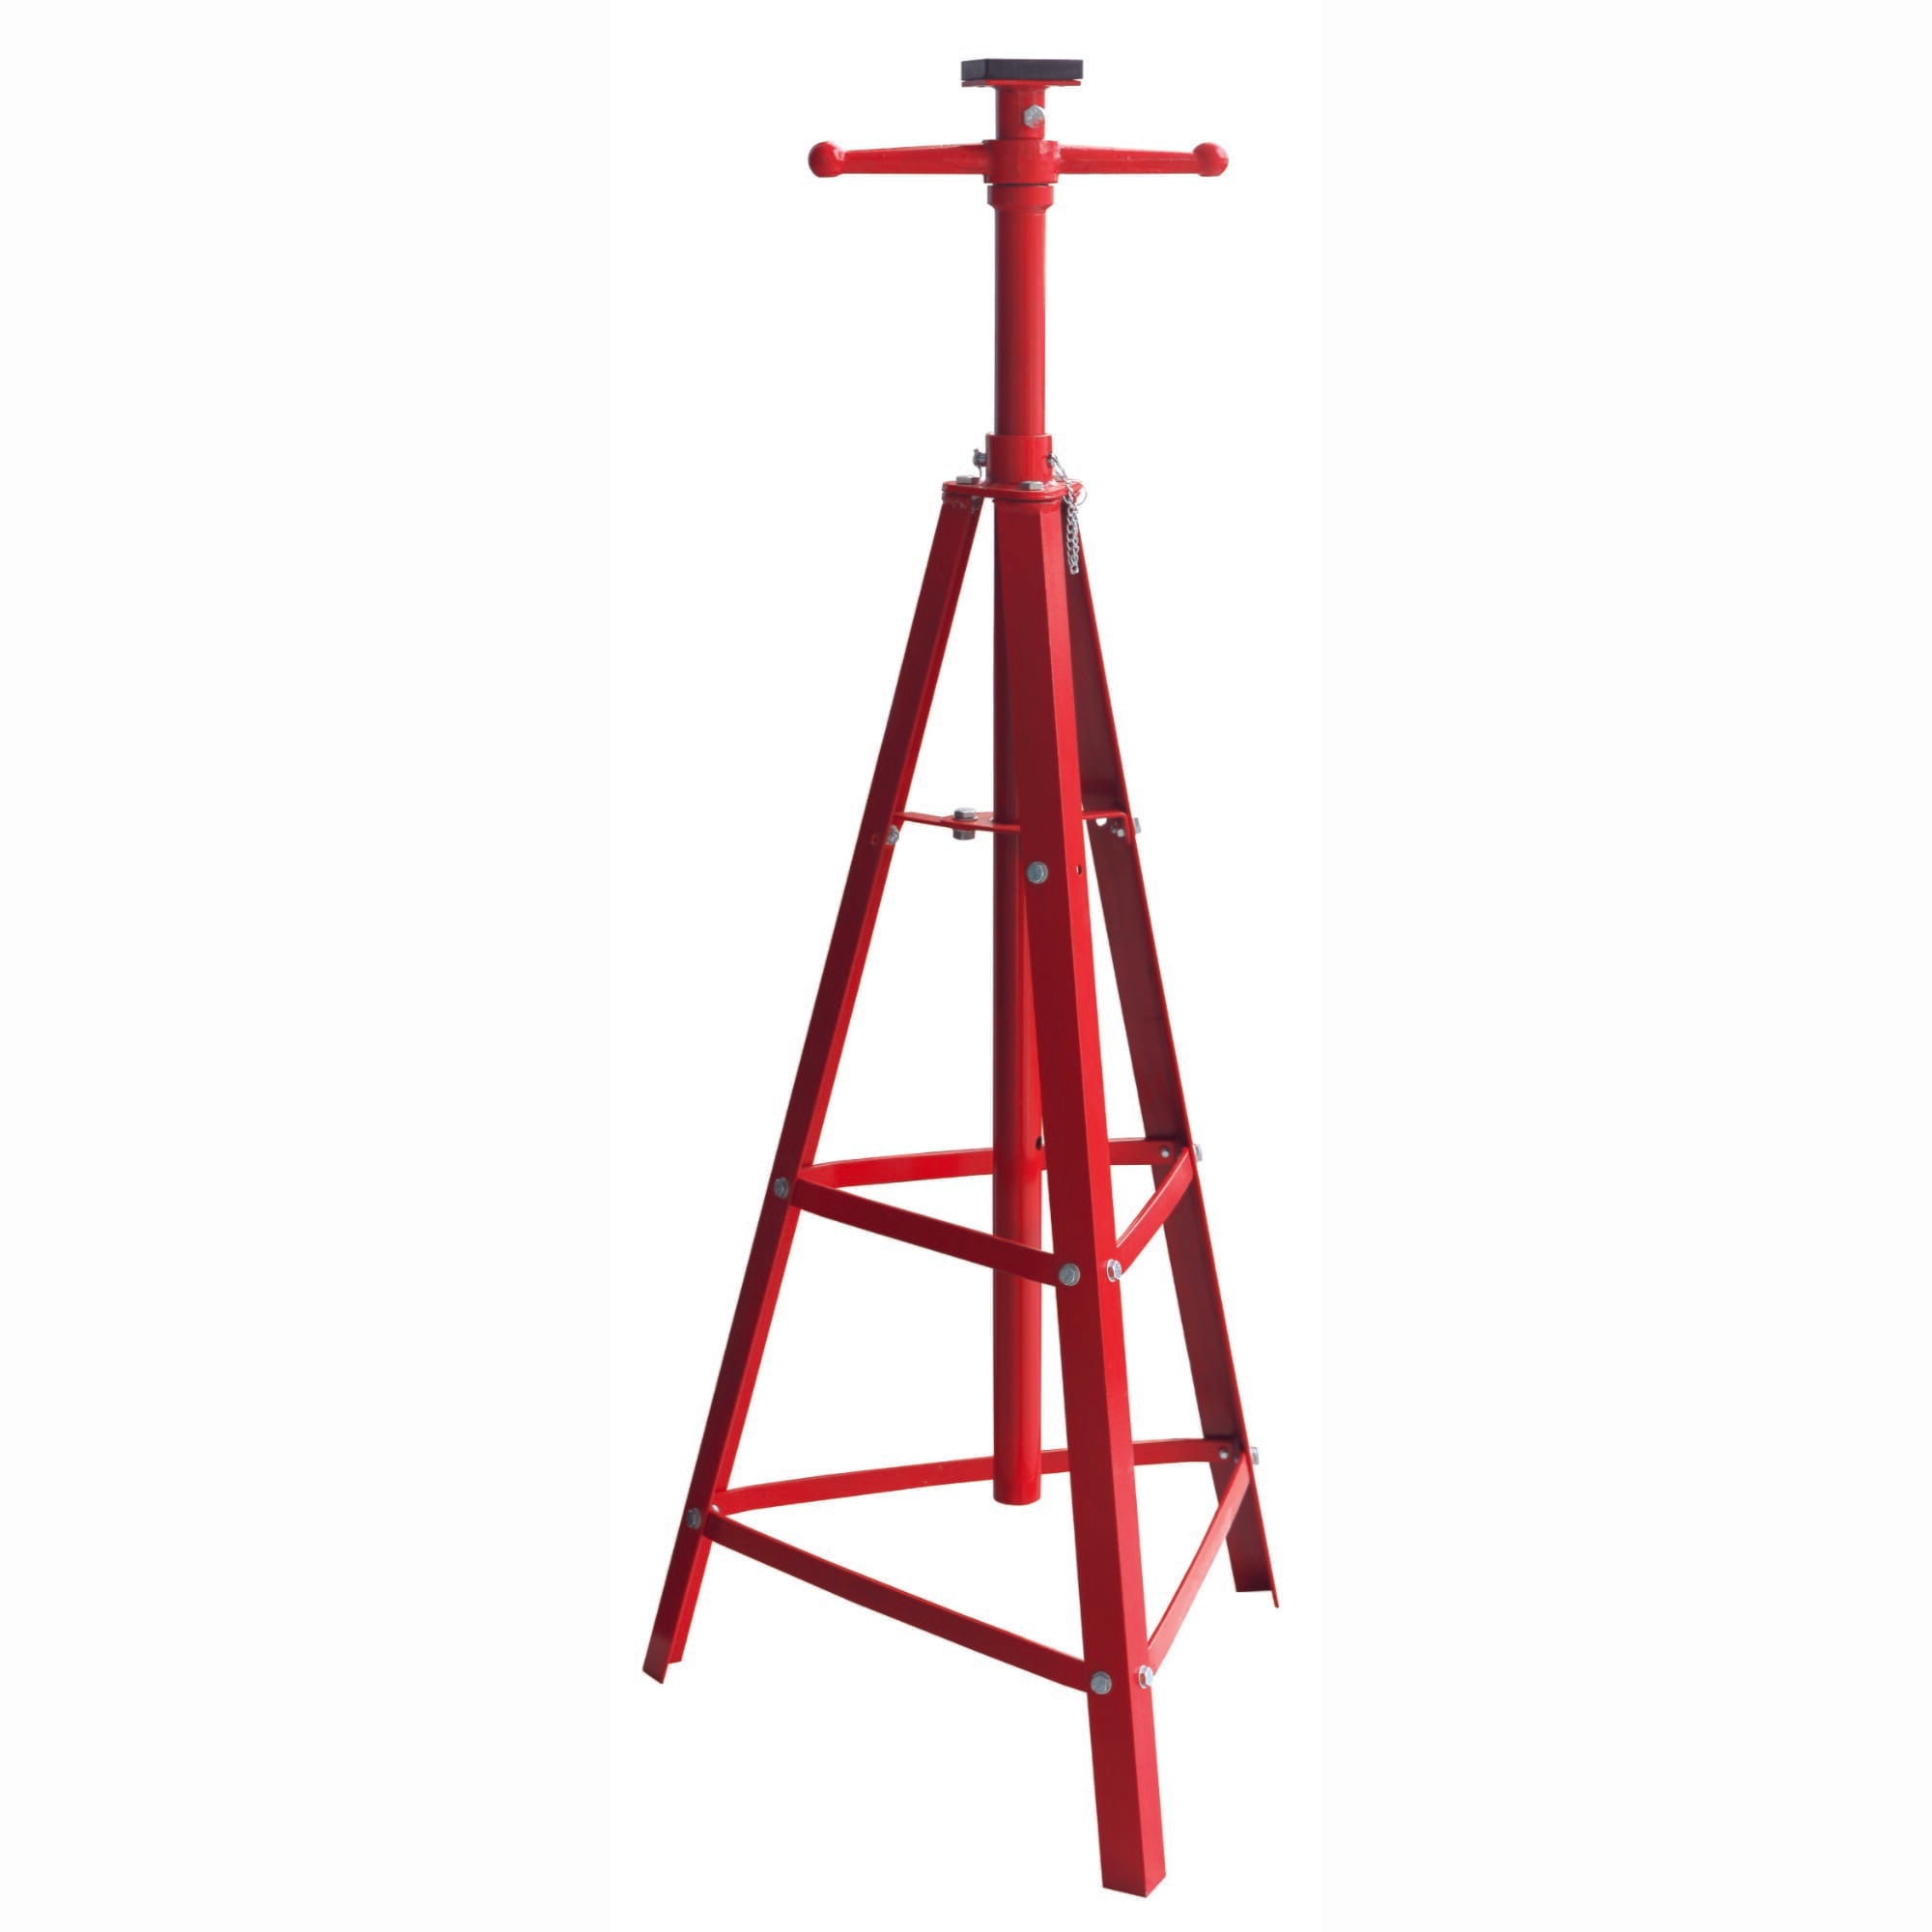 Torin - Big Red High Position Jack Stand 2 Ton